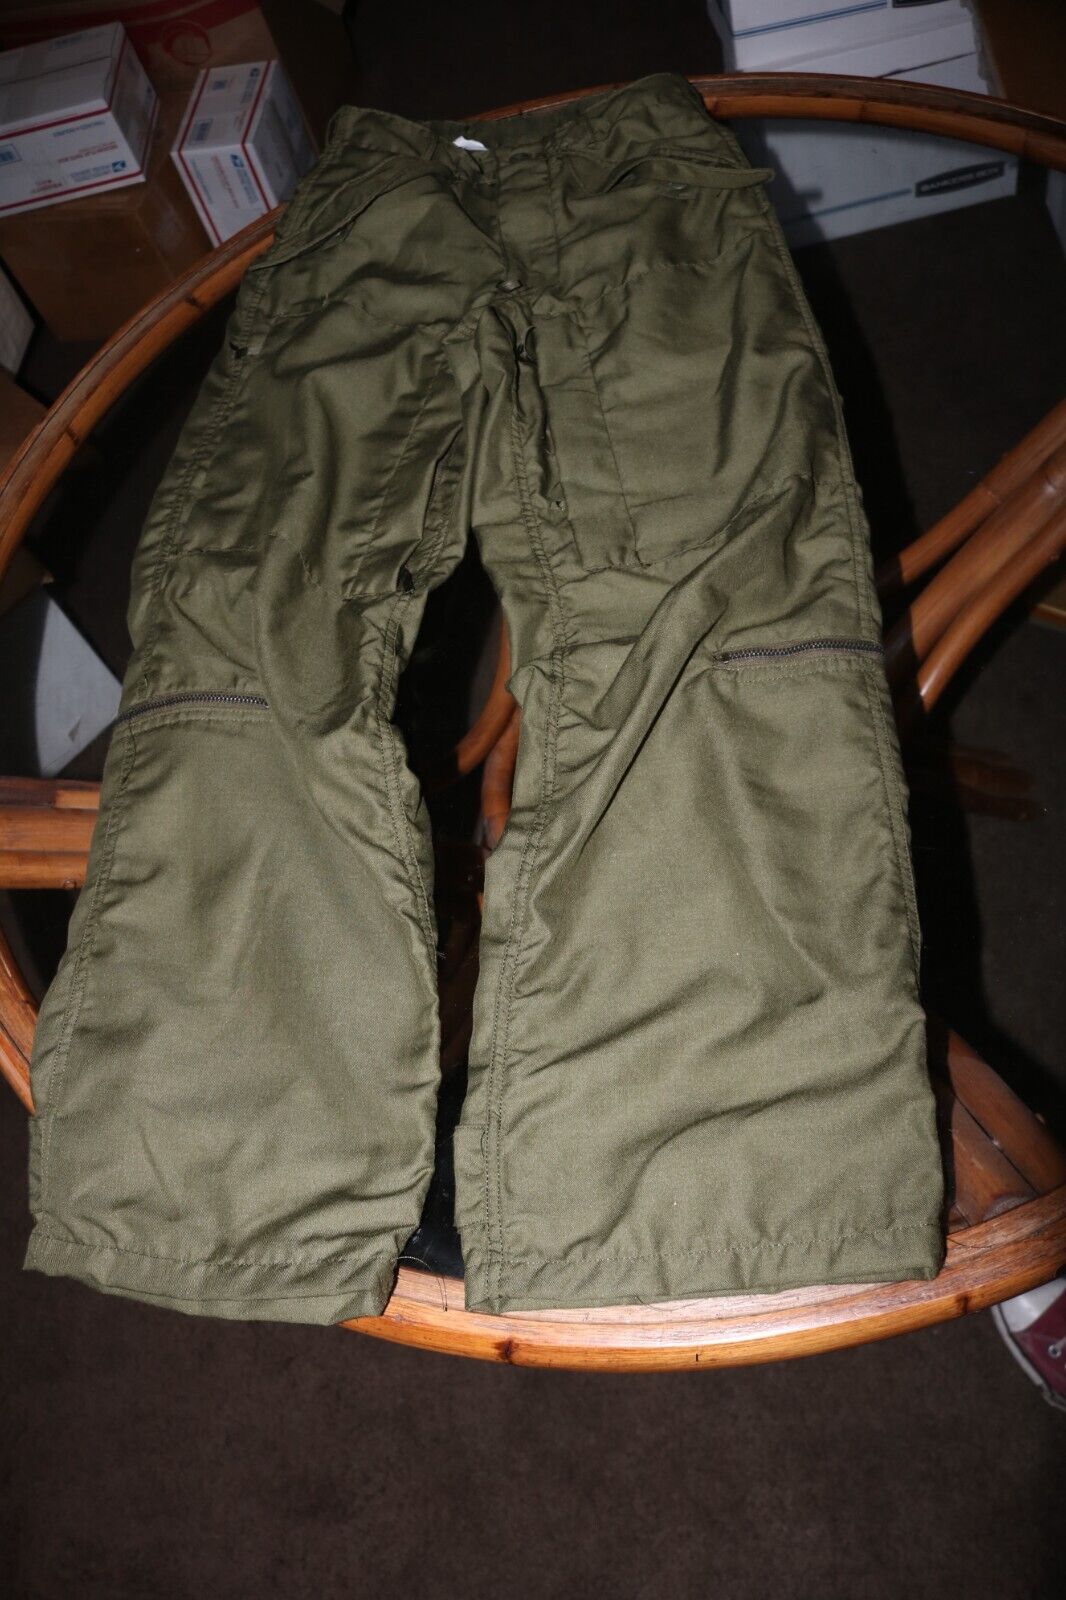 NOS unissued OG-106 Army helicopter aircrew pilots trousers pants sz XS Reg 1971